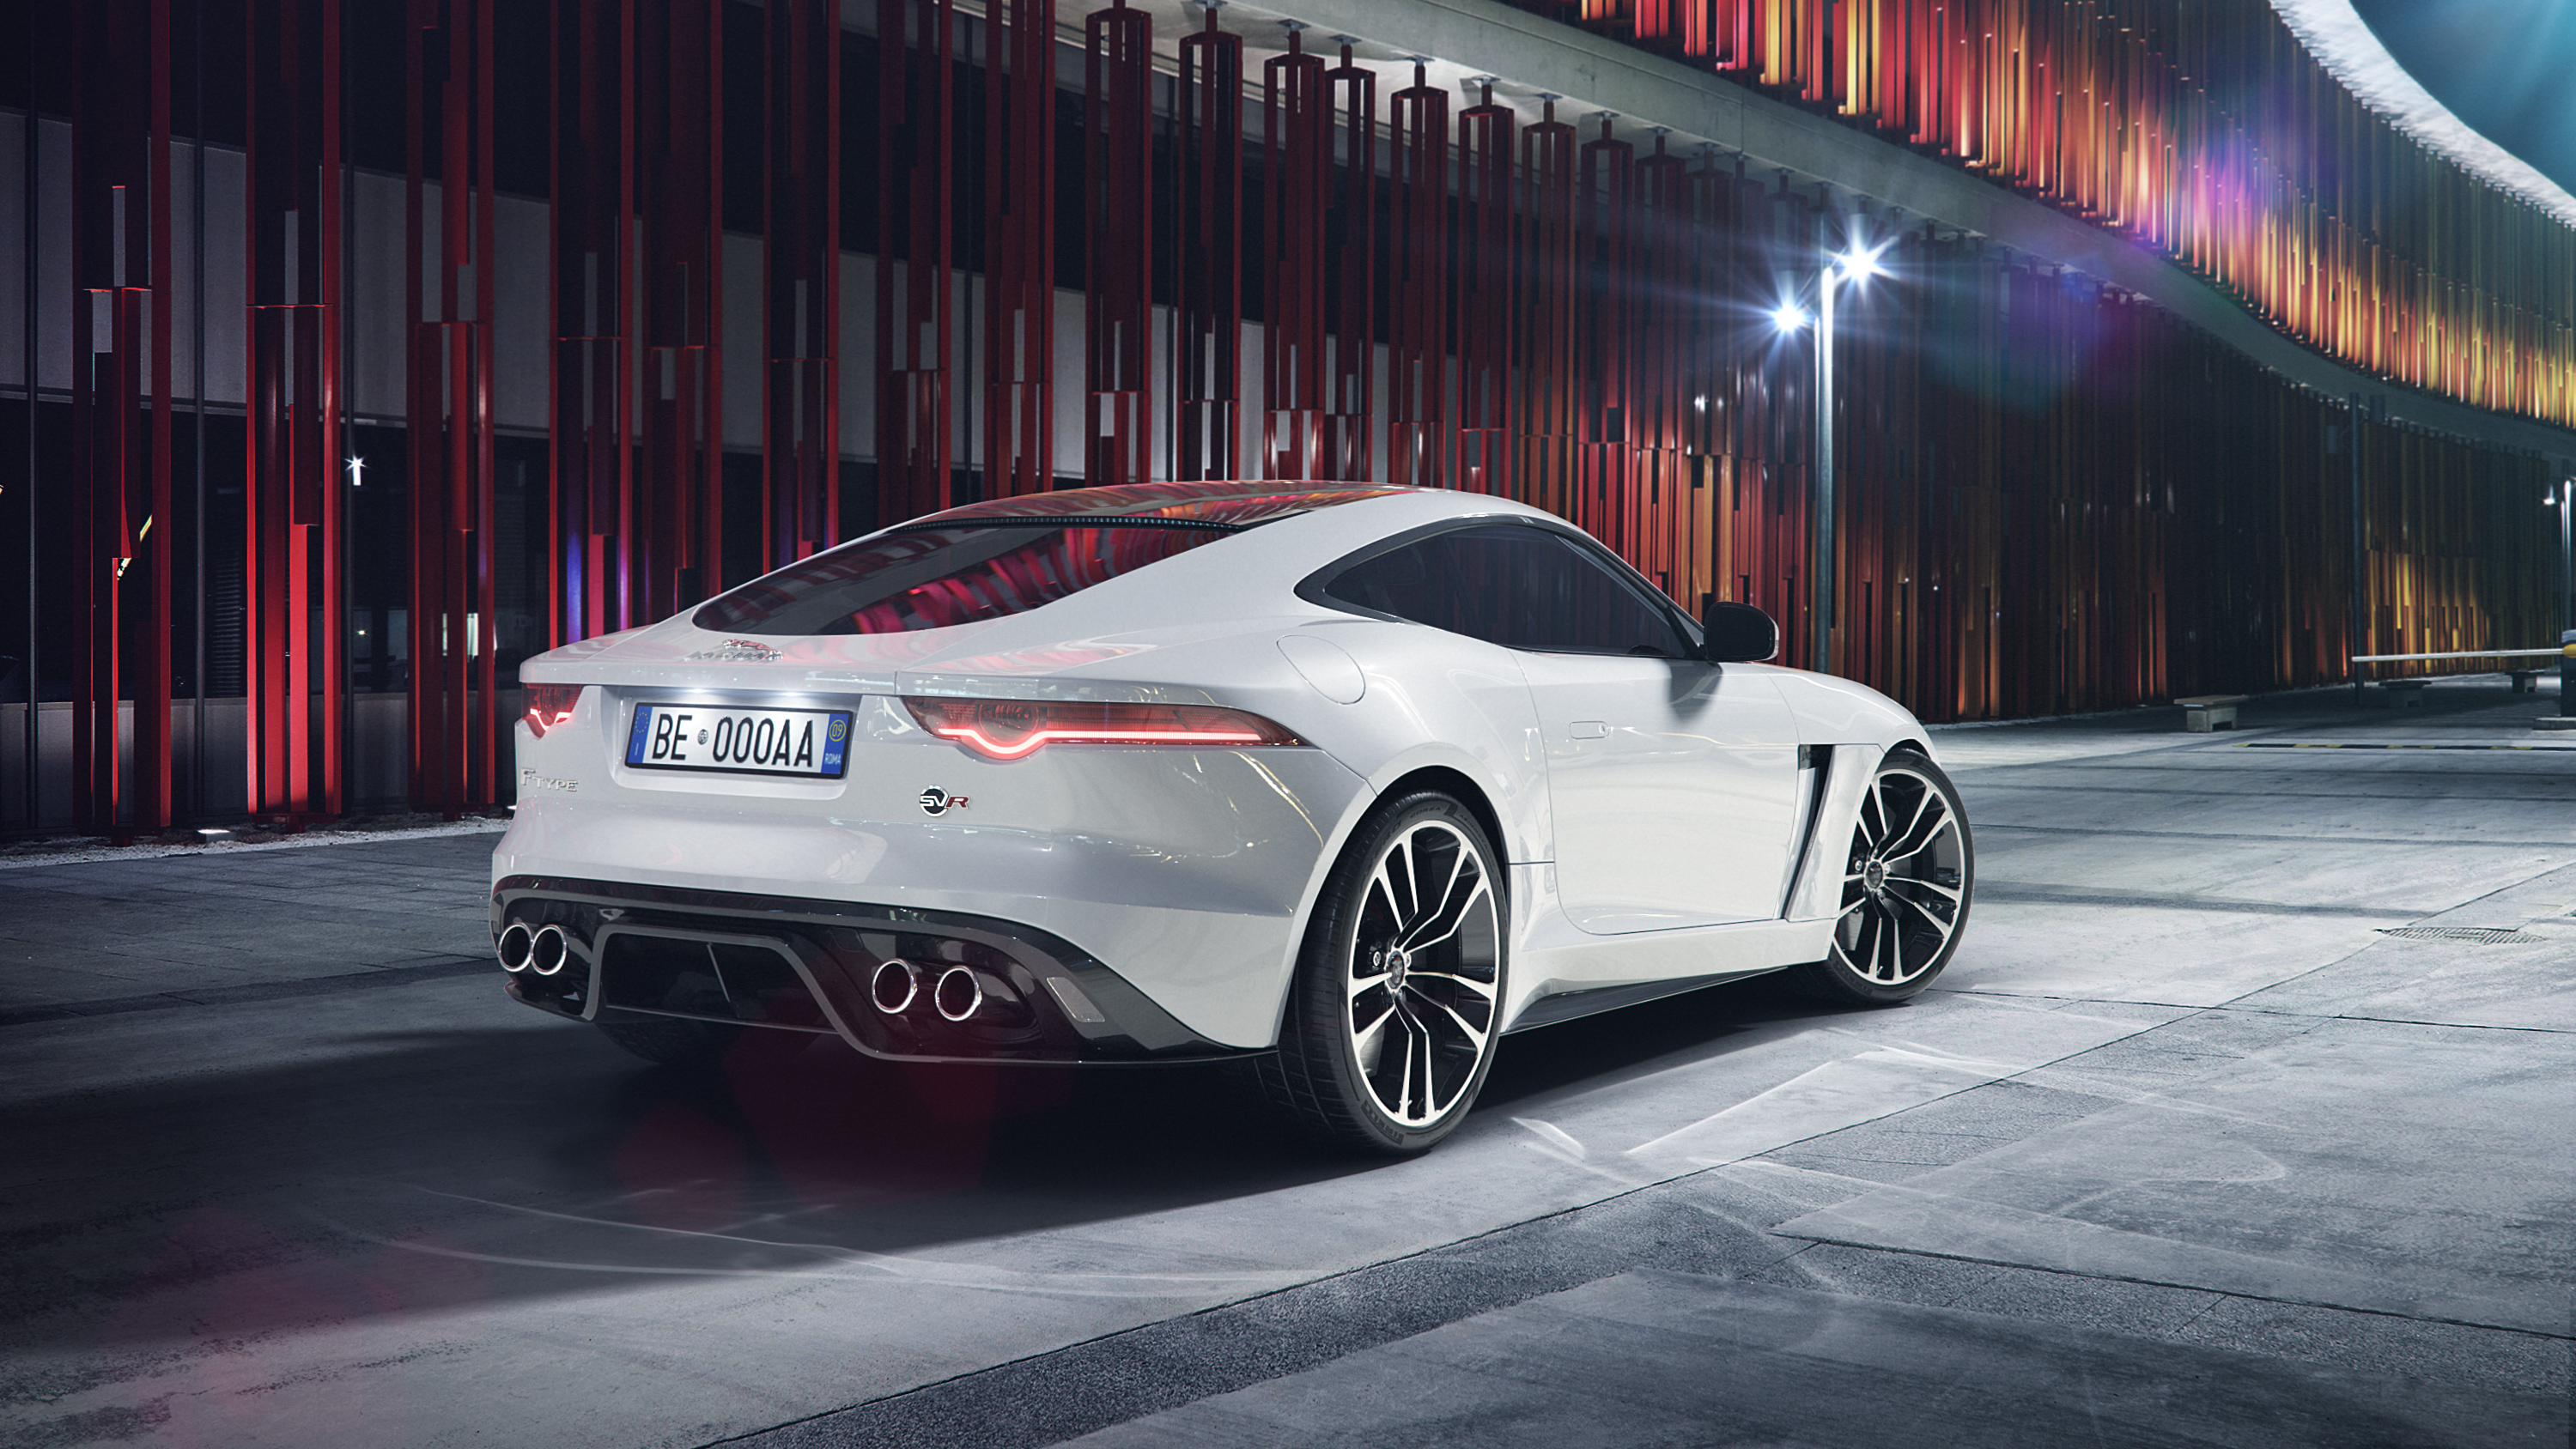 Jaguar F-Type S Coupe Wallpapers